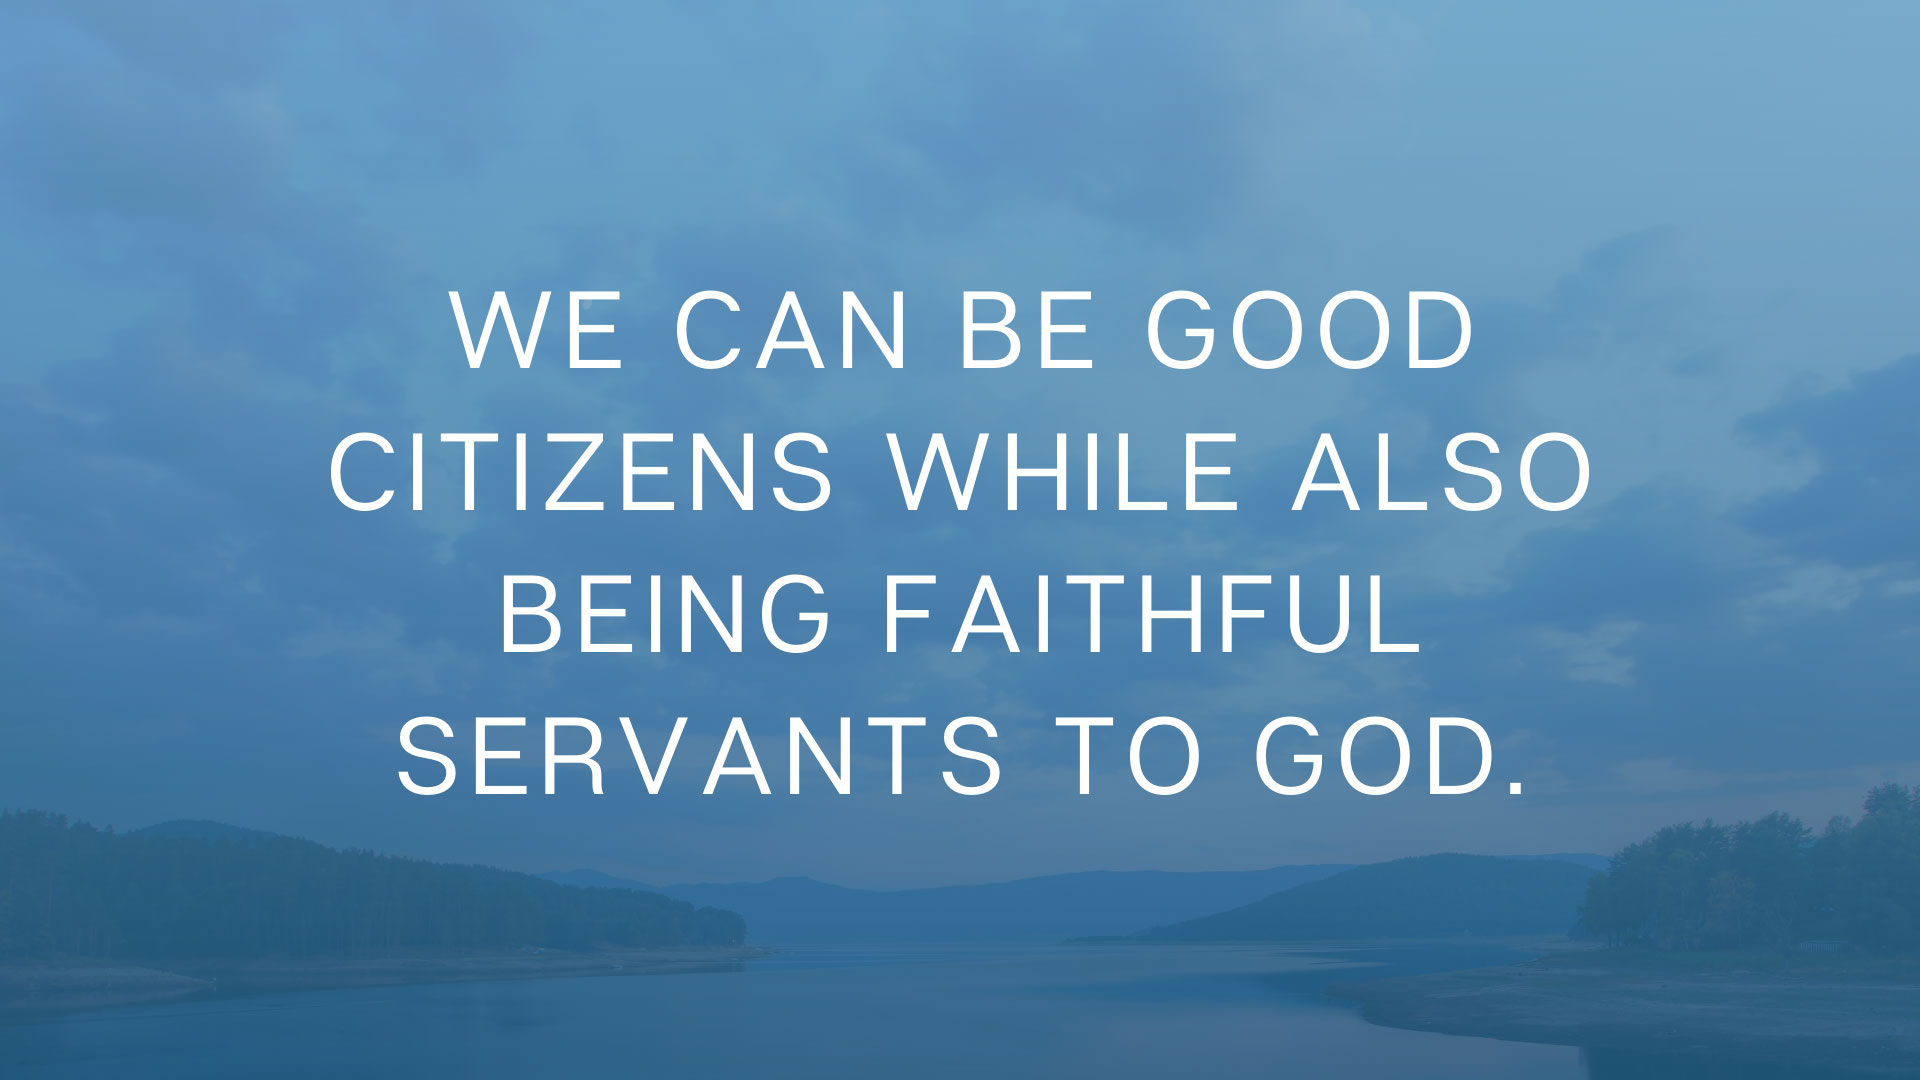 we can be good citizens while also being faithful servants to god